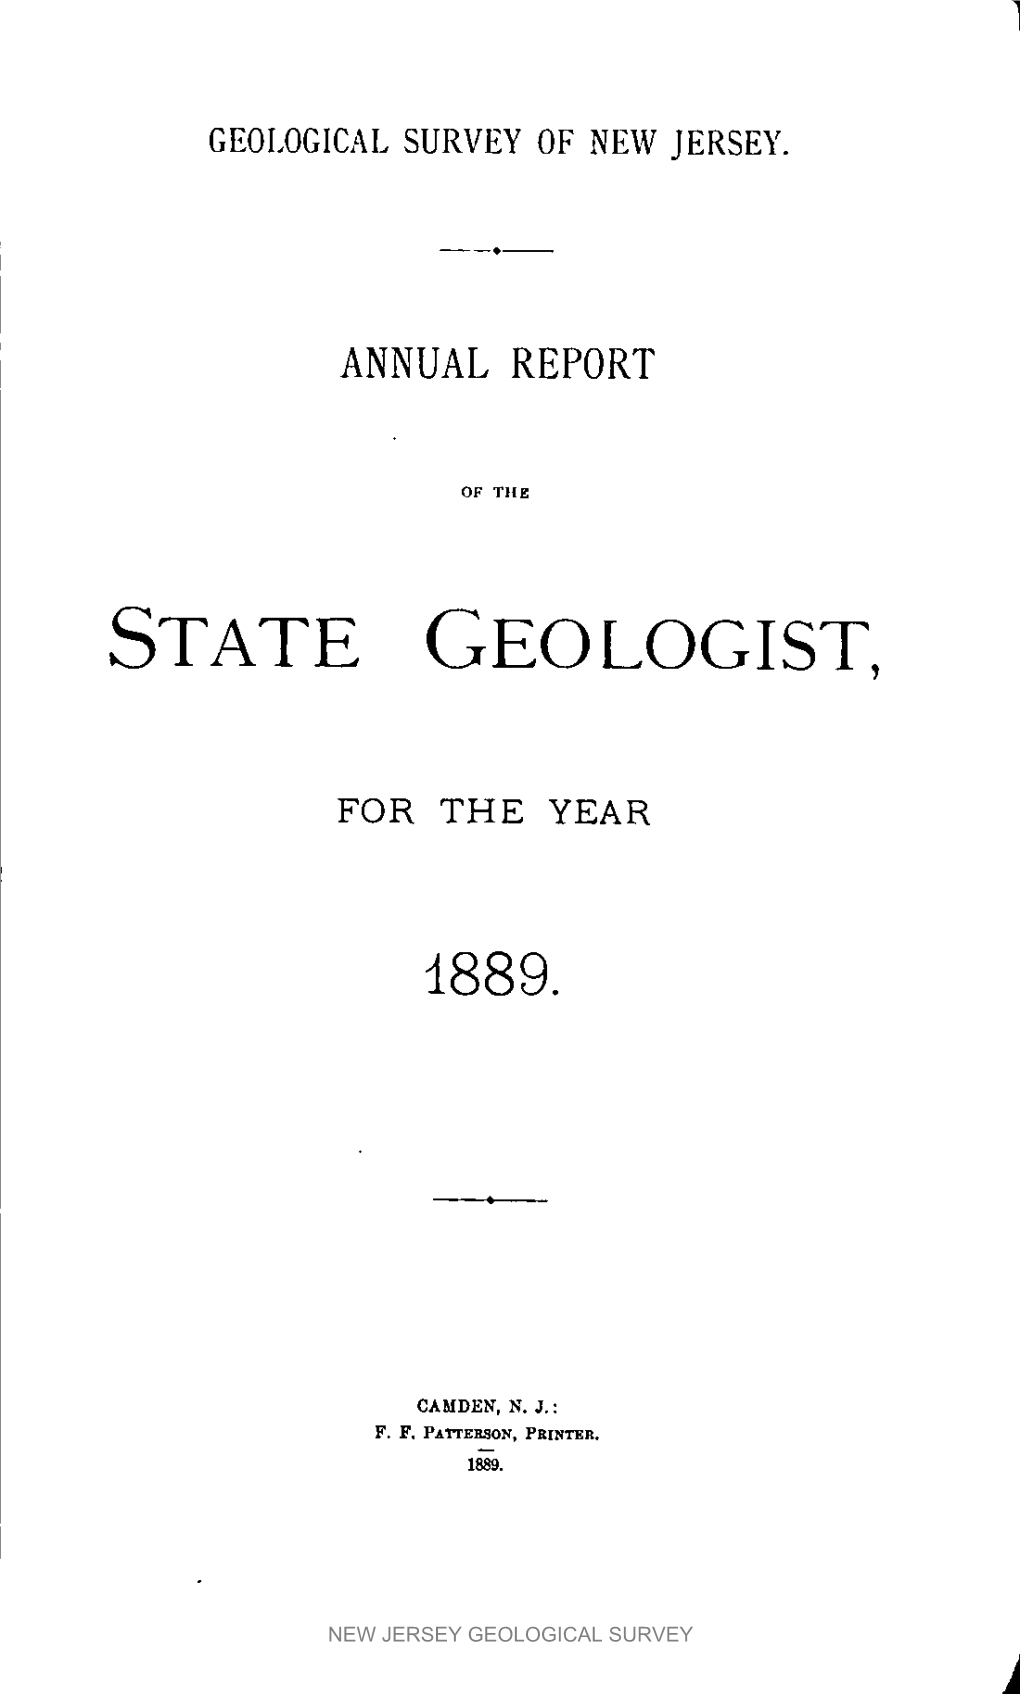 Annual Report of the State Geologist for the Year 1889